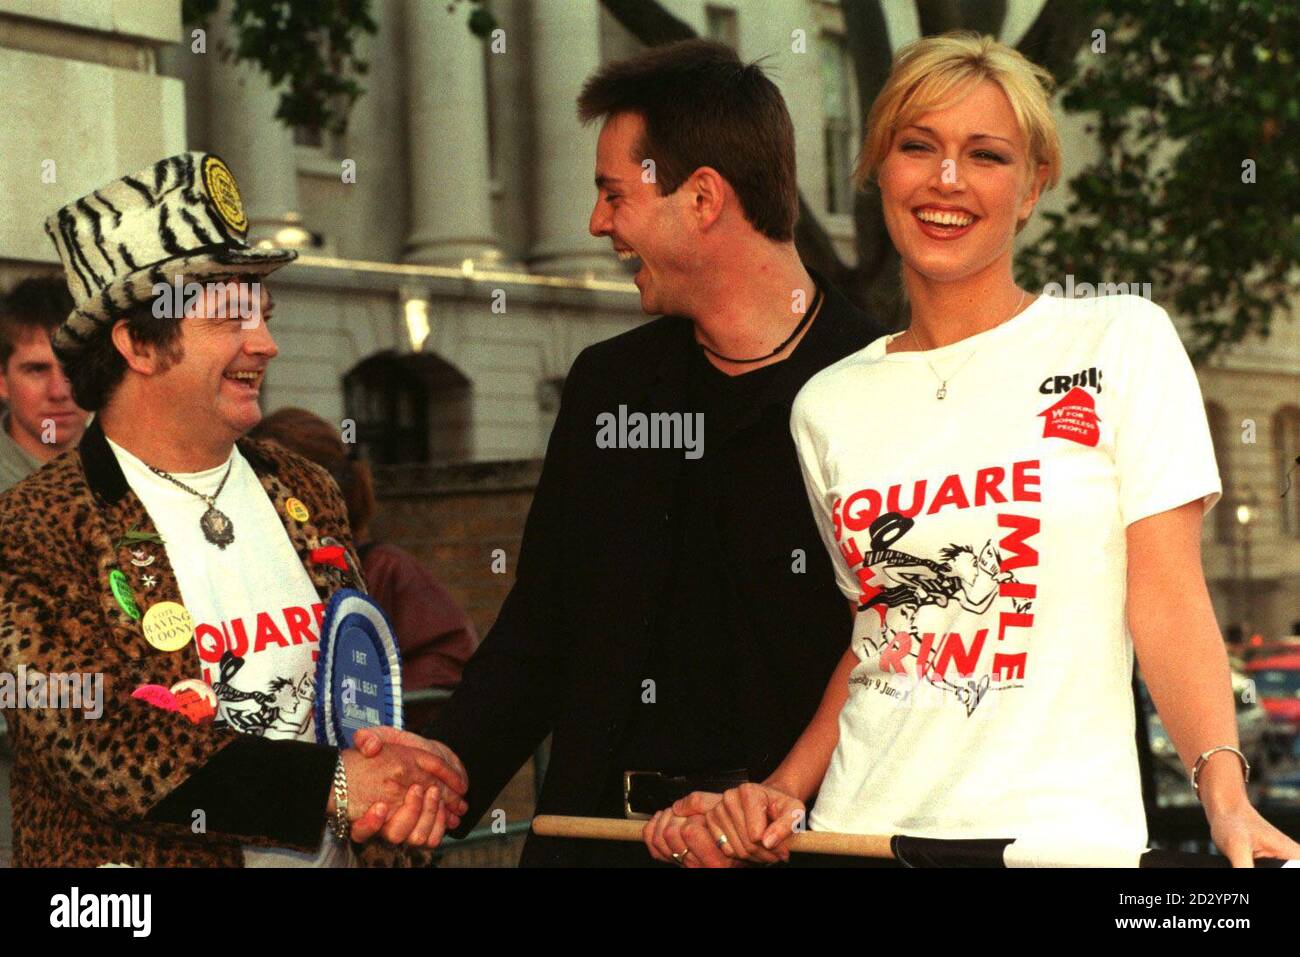 PA NEWS PHOTO 9/6/98  TELEVISION PRESENTER AND MODEL EMMA NOBLE WITH HER FIANCEE JAMES MAJOR SHARES A JOKE WITH LORD SUTCH OF THE MONSTER RAVING LOONY PARTY AT A PHOTOCALL FOR THE SQUARE MILE RUN IN AID OF HOMELESS CHARITY 'CRISIS' IN LONDON Stock Photo